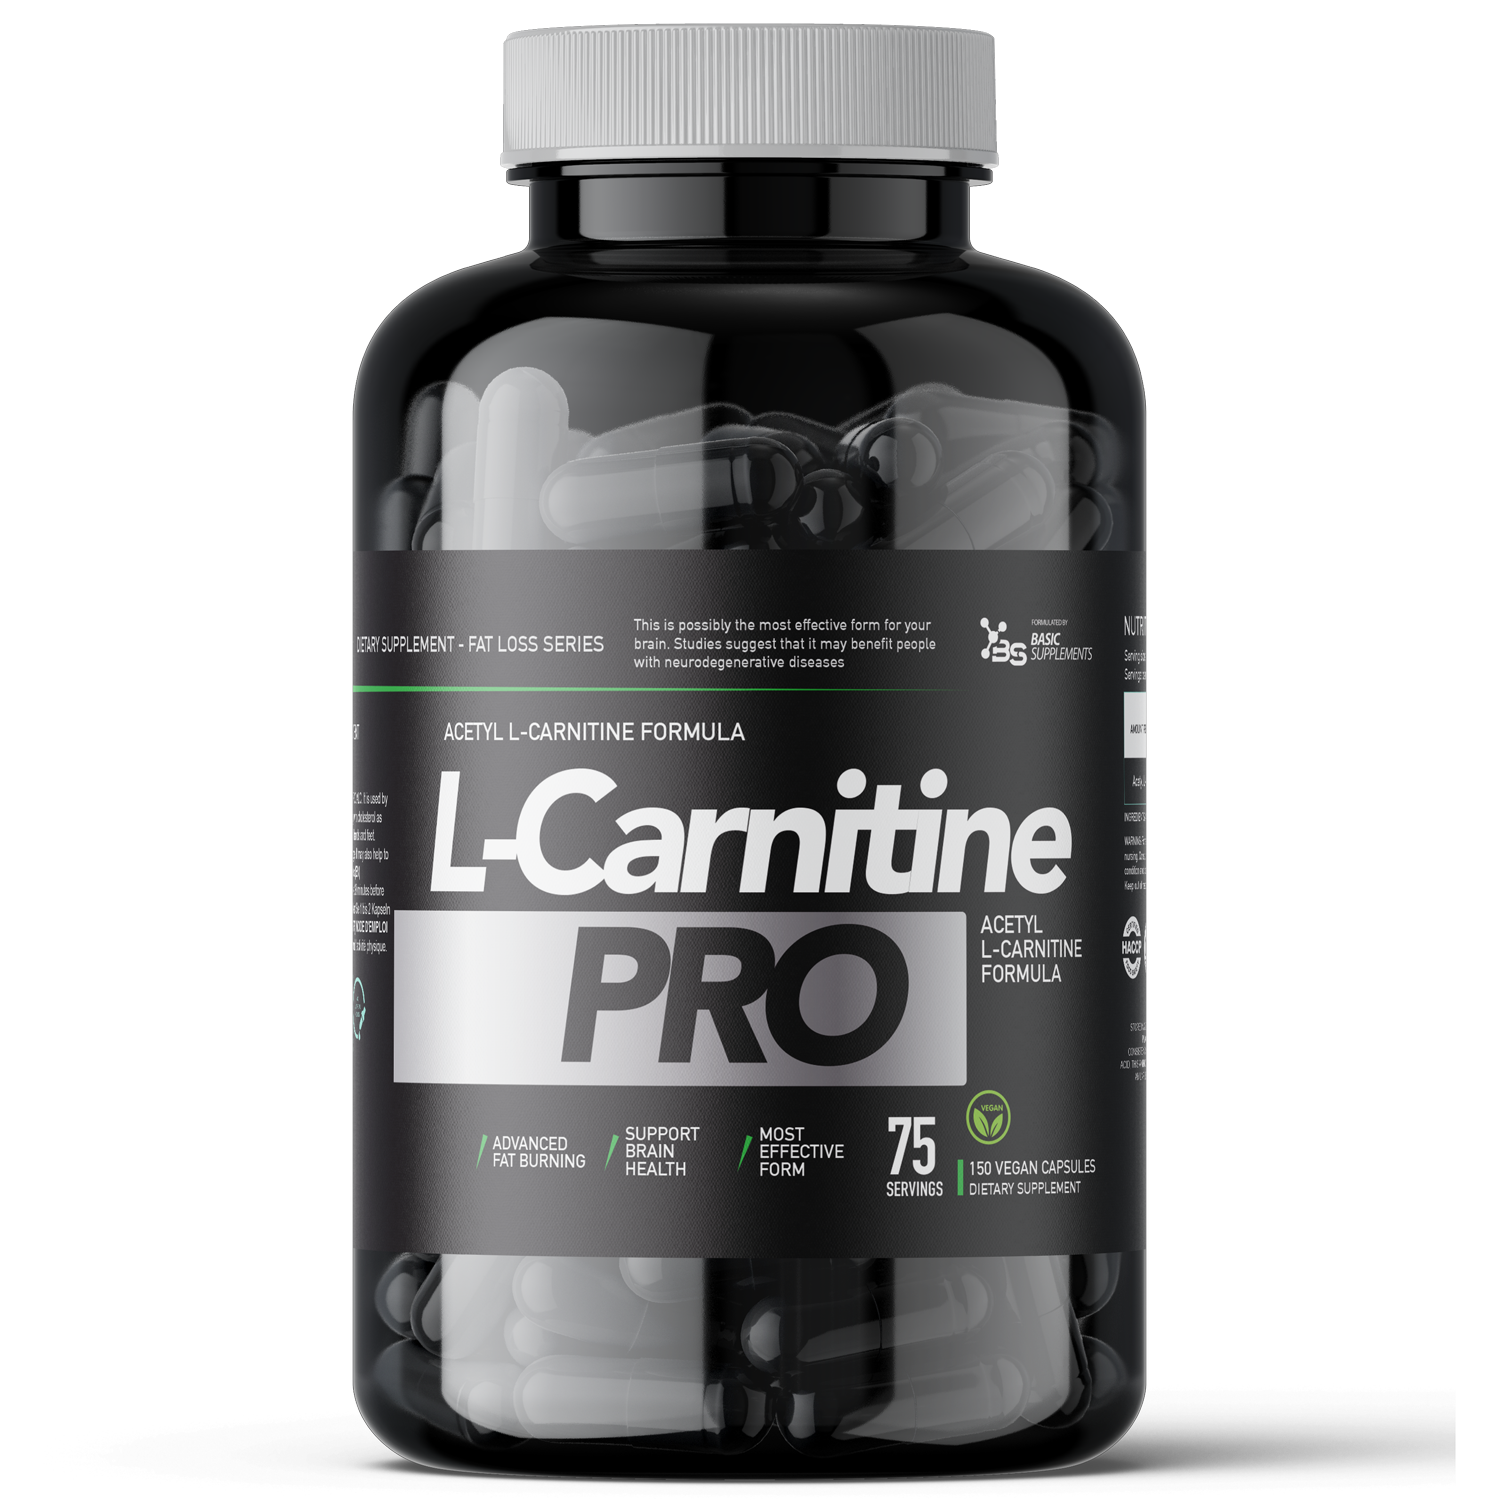 acetyl-l-carnitine-basic-supplements-ogistra